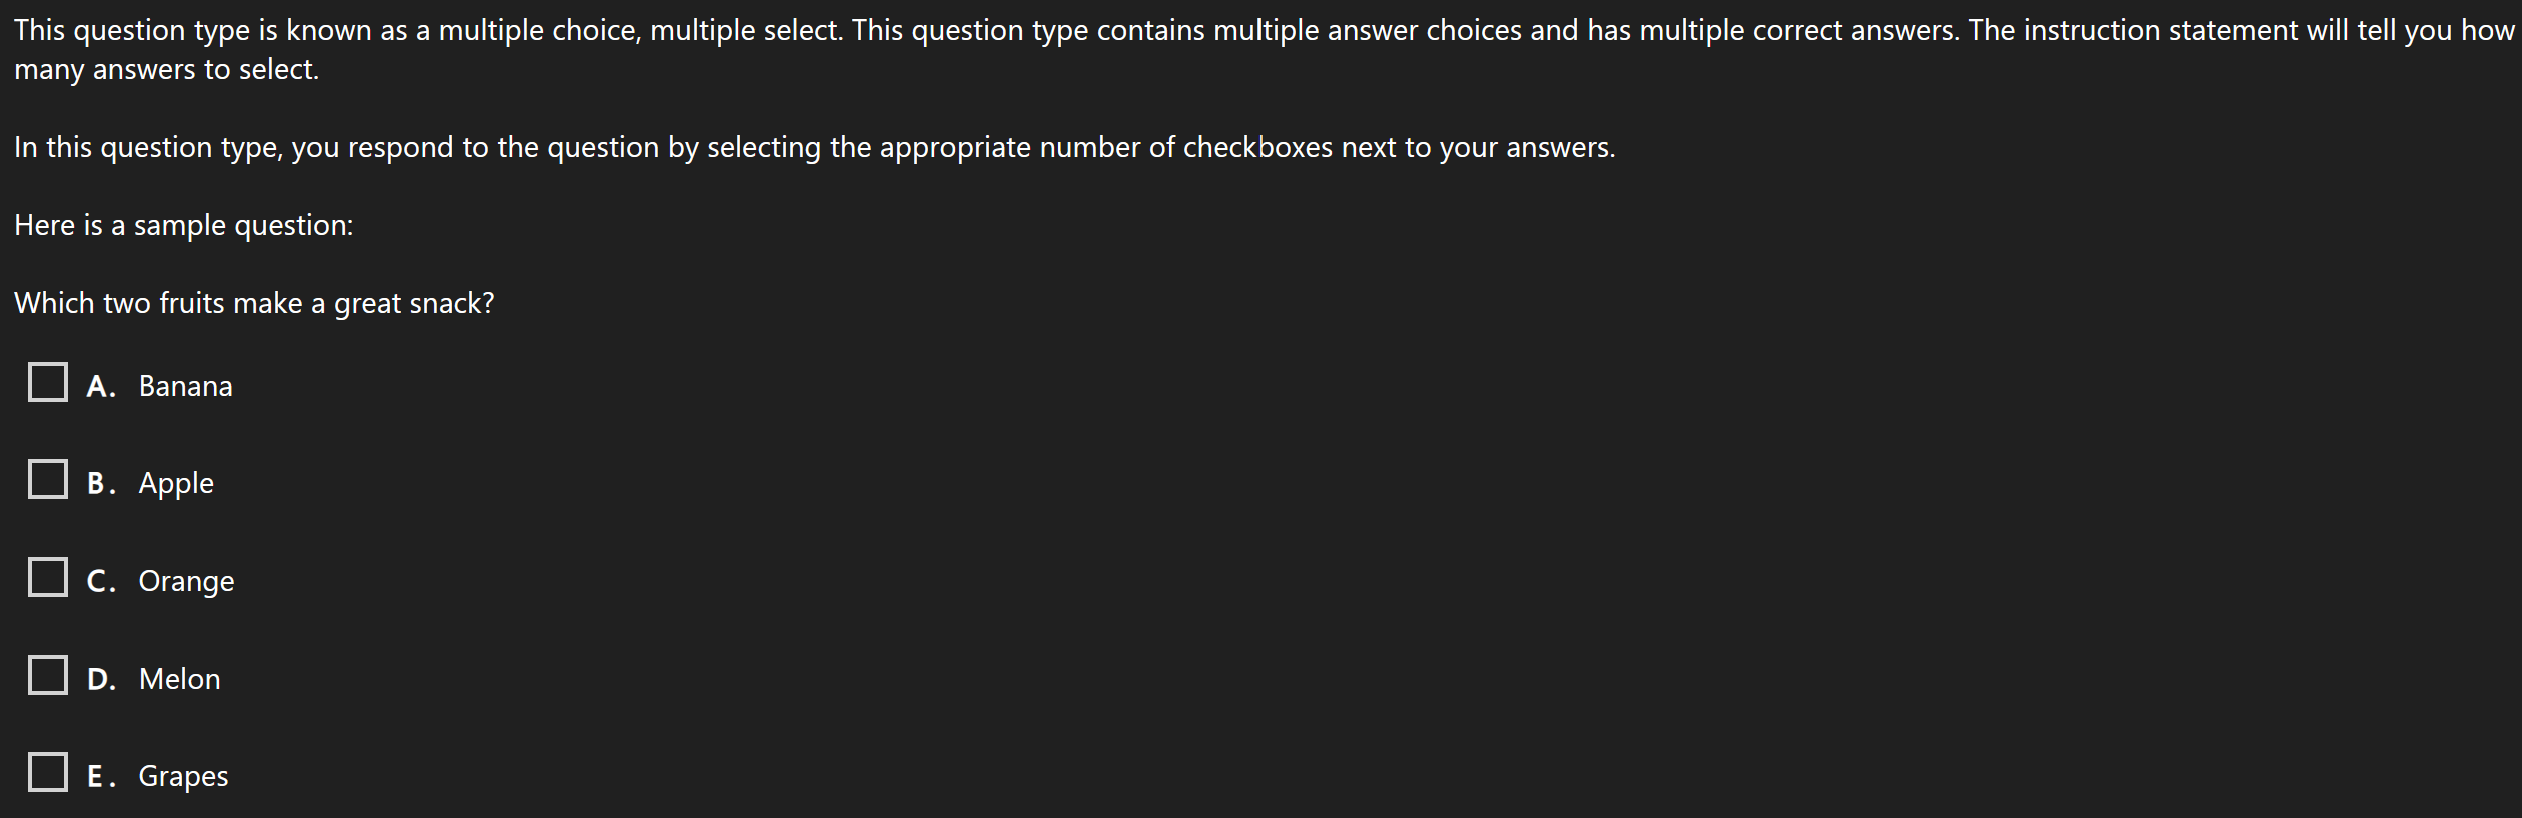 Multiple Choice & Multiple Select Question Type